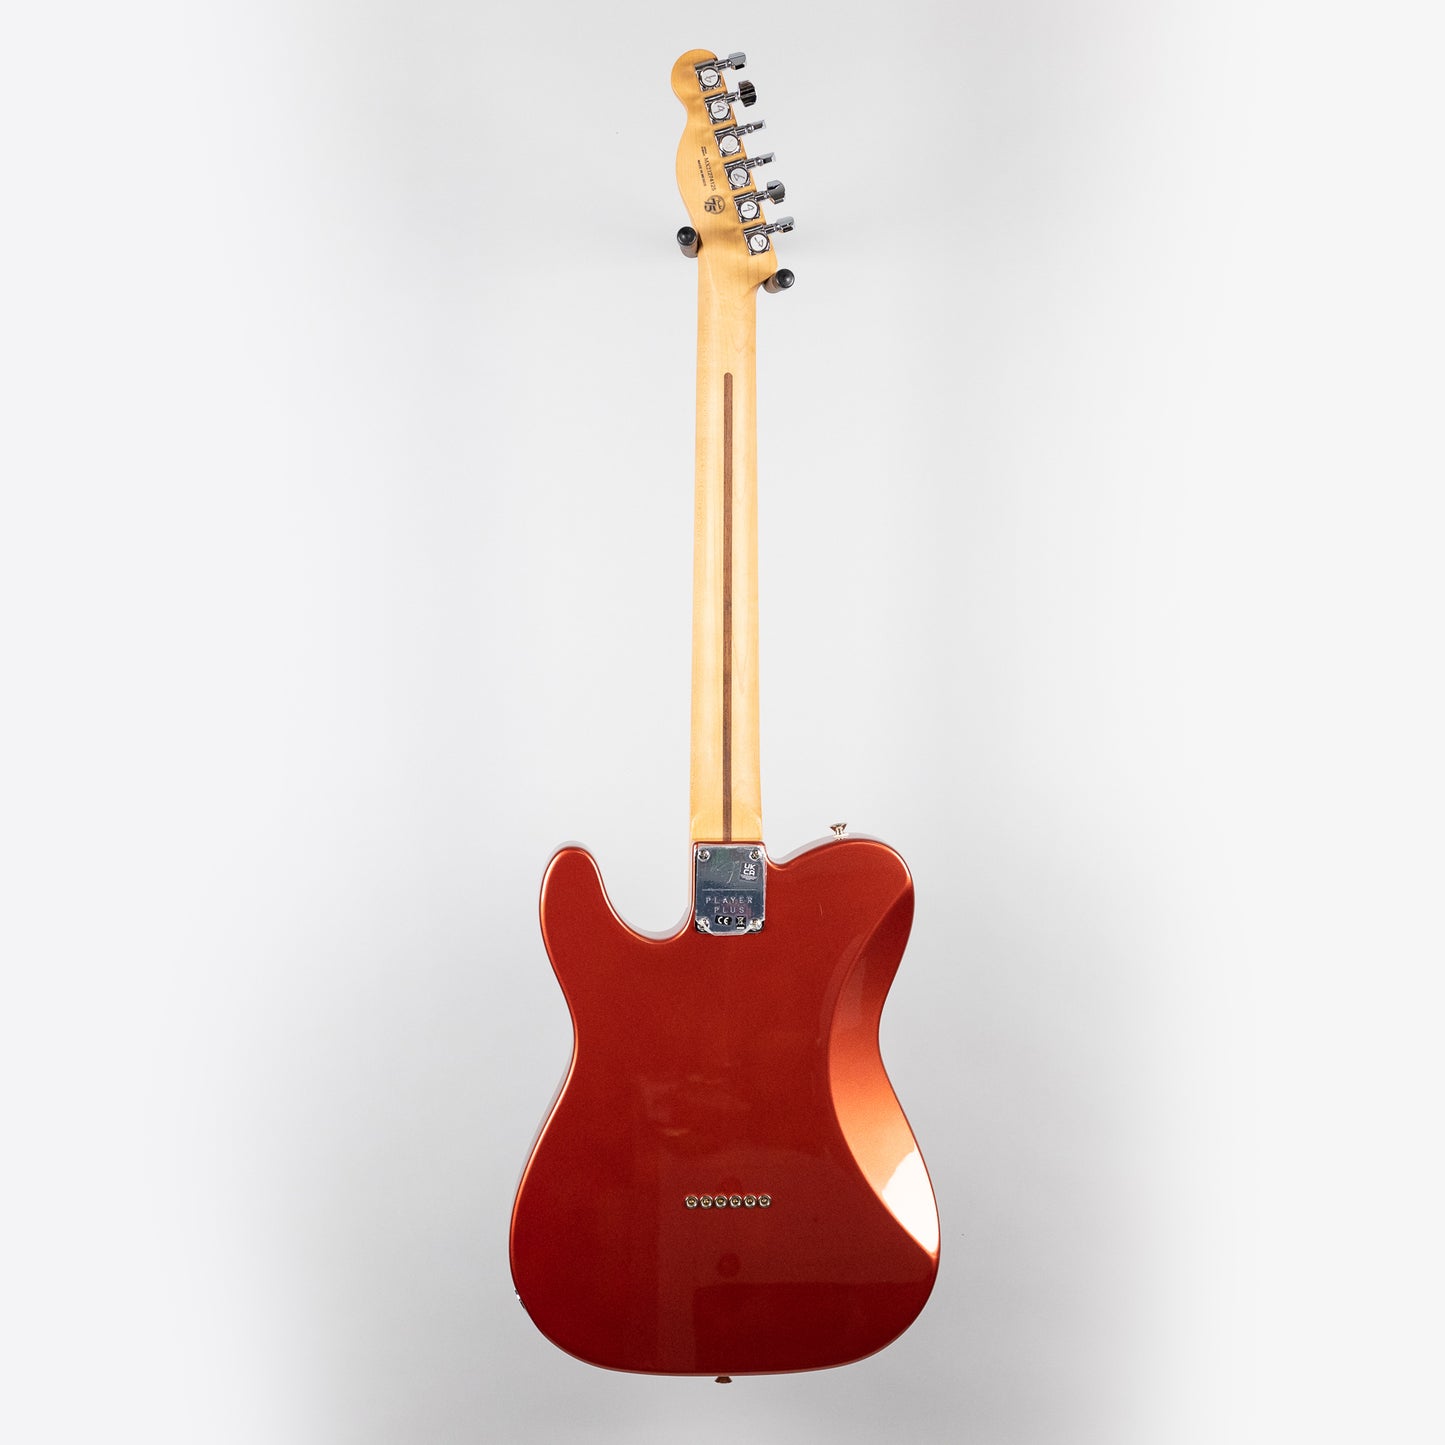 Fender Player Plus Telecaster in Aged Candy Apple Red (MX21274125)